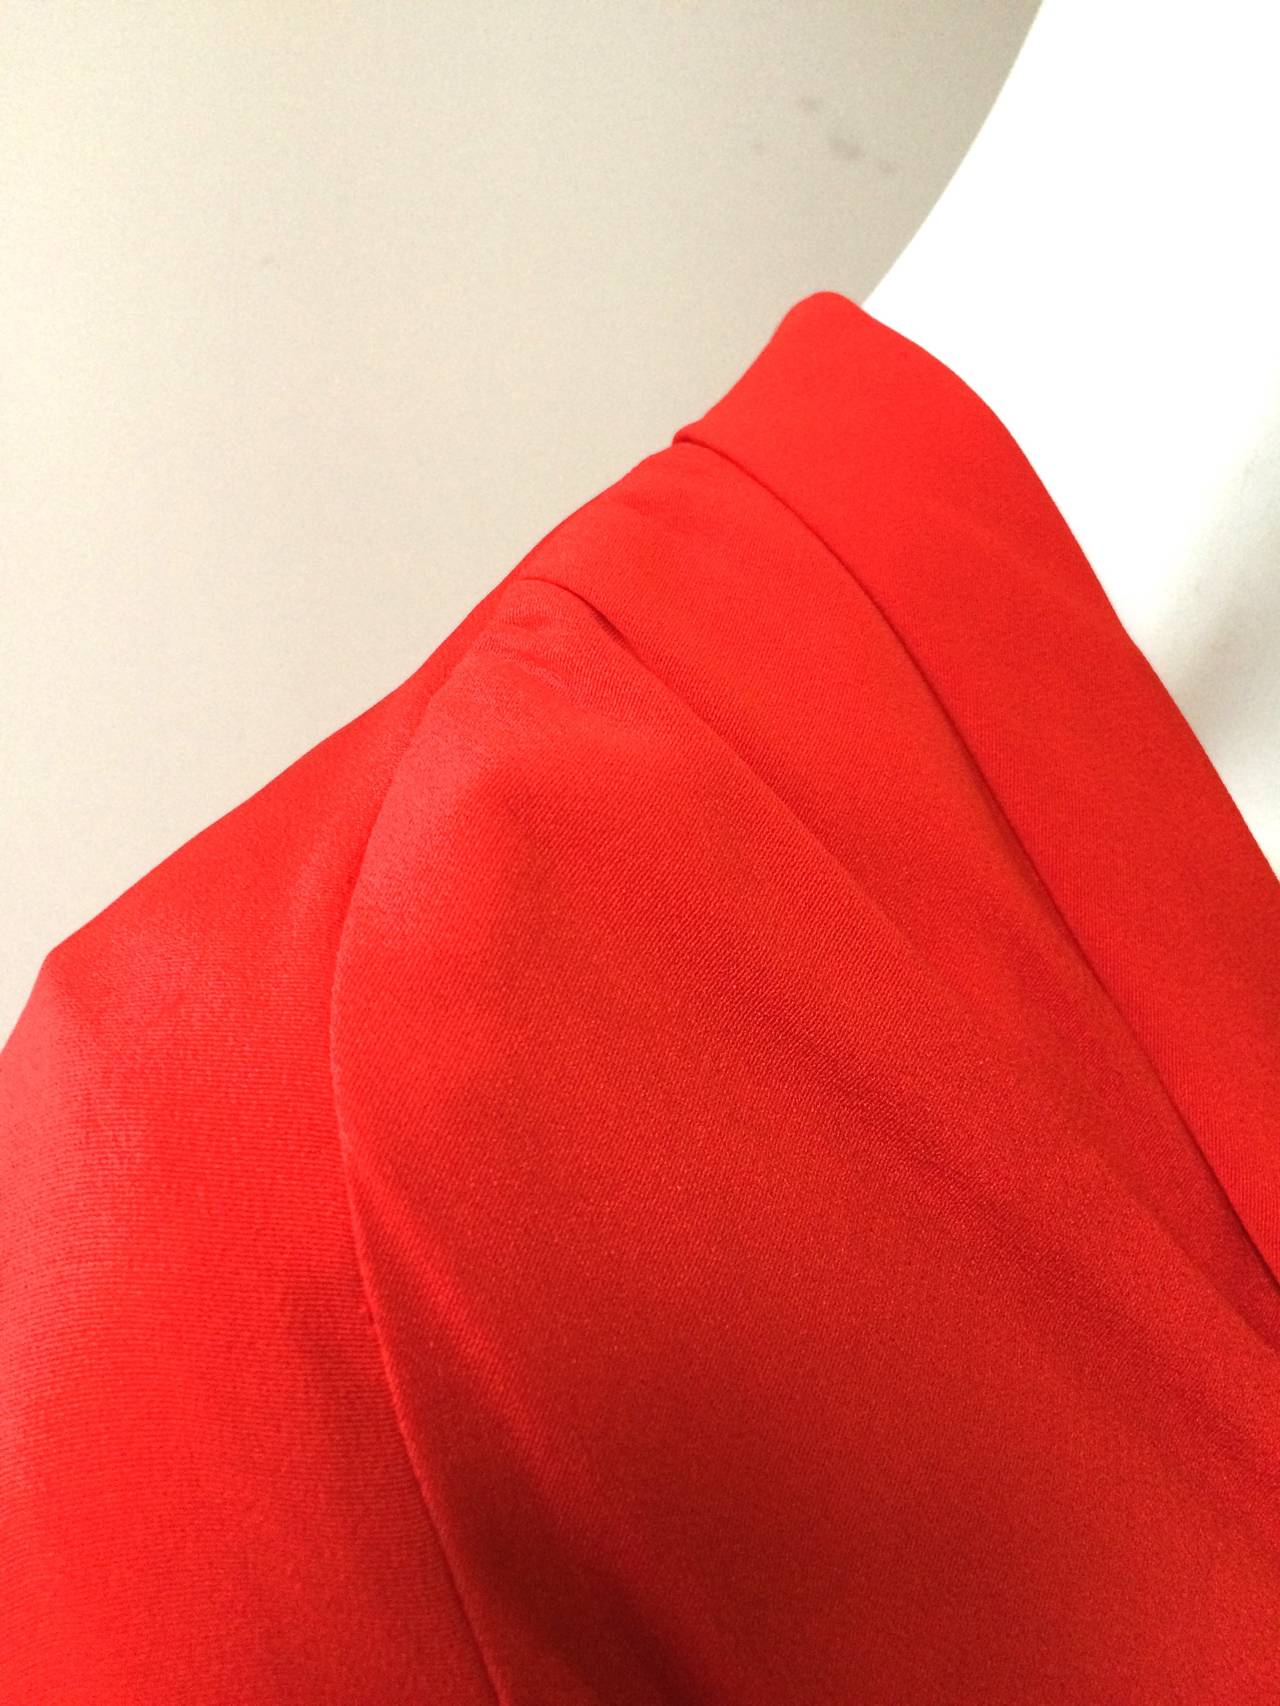 Geoffrey Beene 1960s Red Silk Maxi Dress with Pockets Size 4/6. For Sale 1